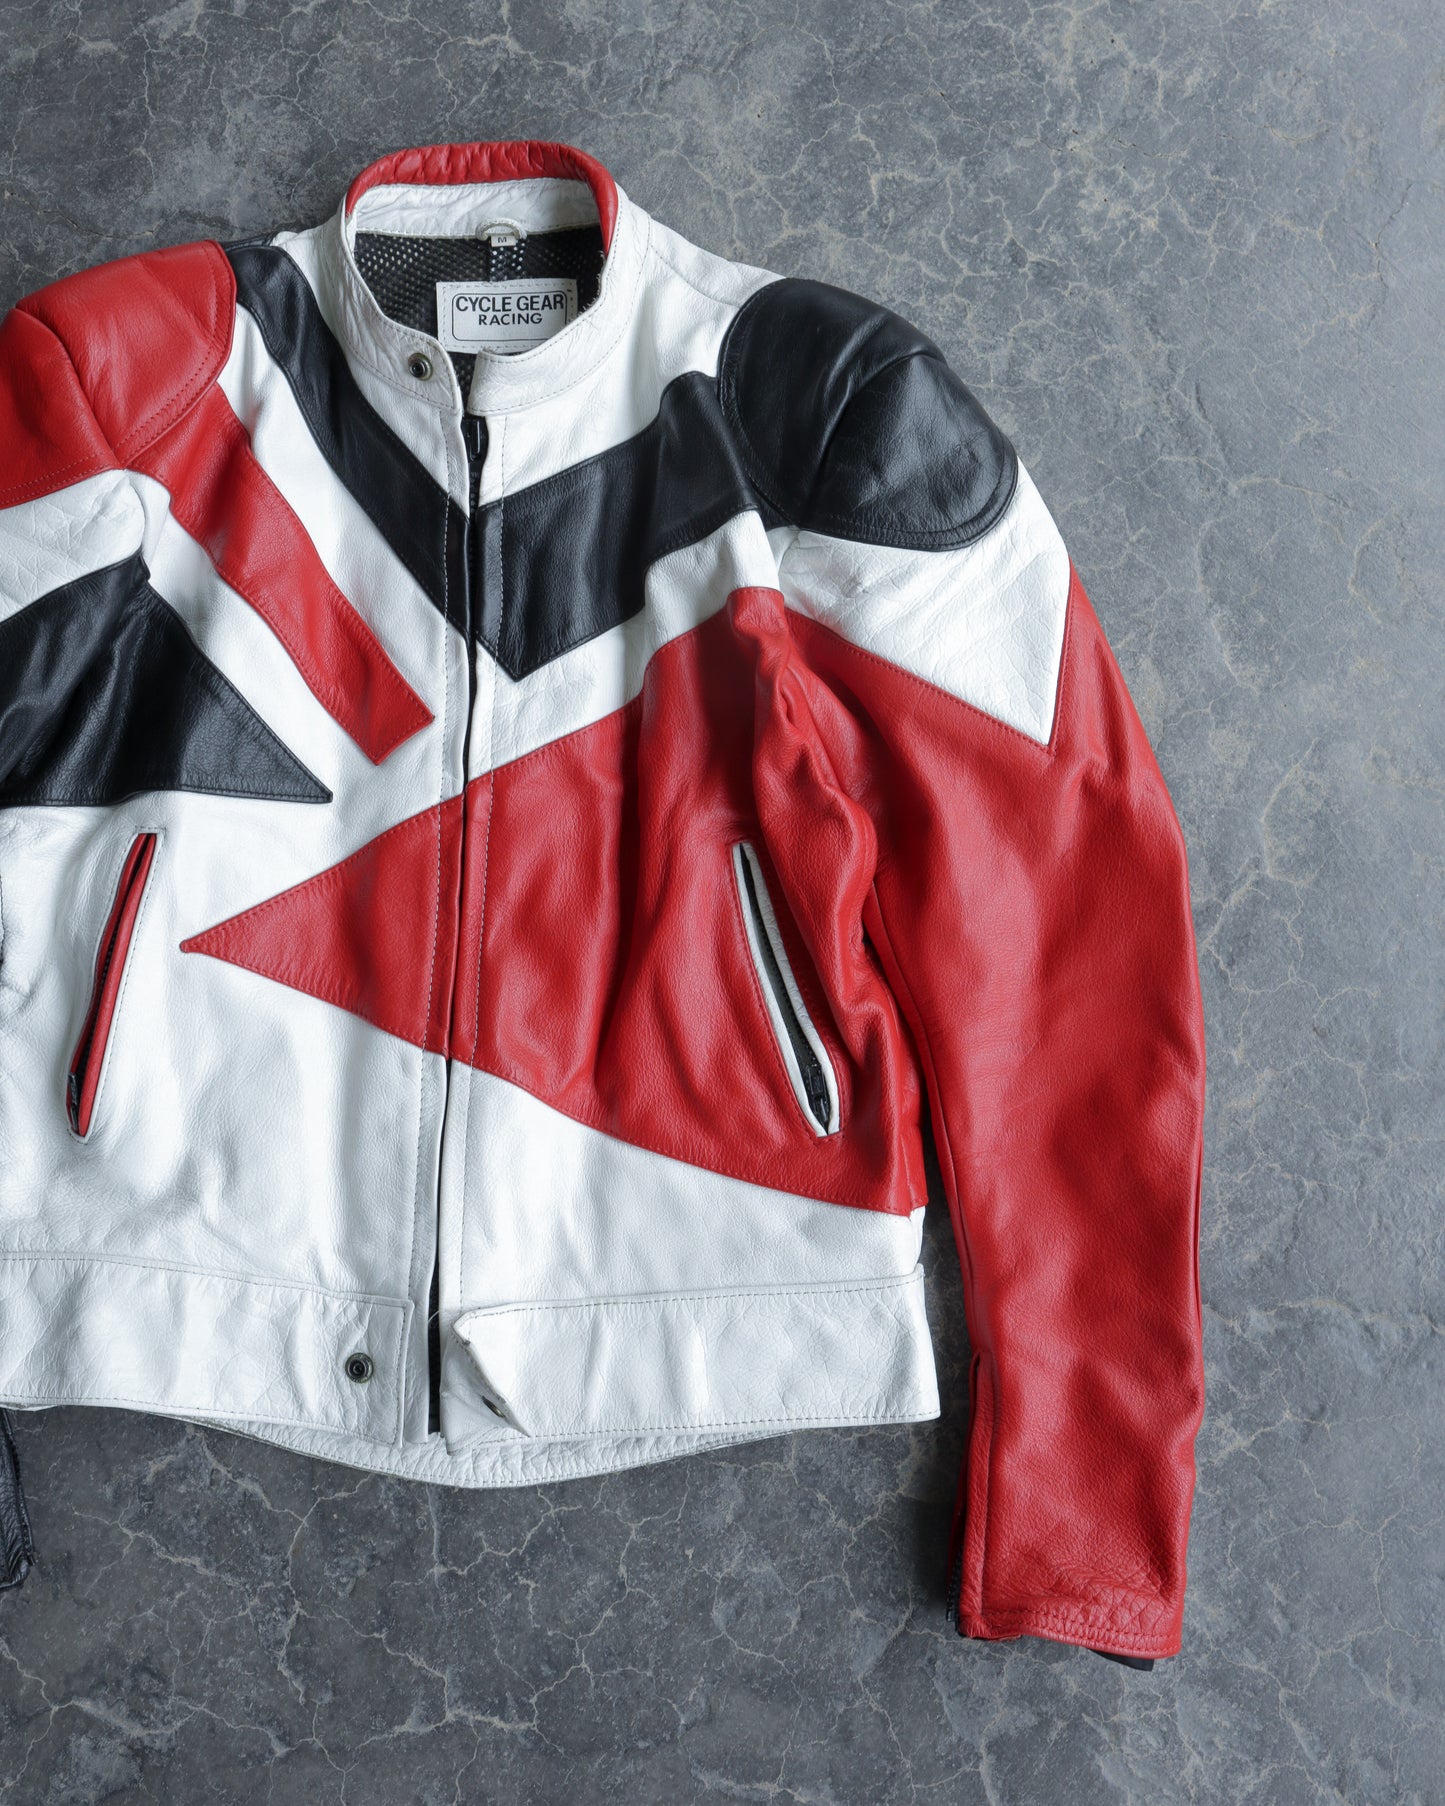 90s Motorcycle Cycle Gear Jacket - M